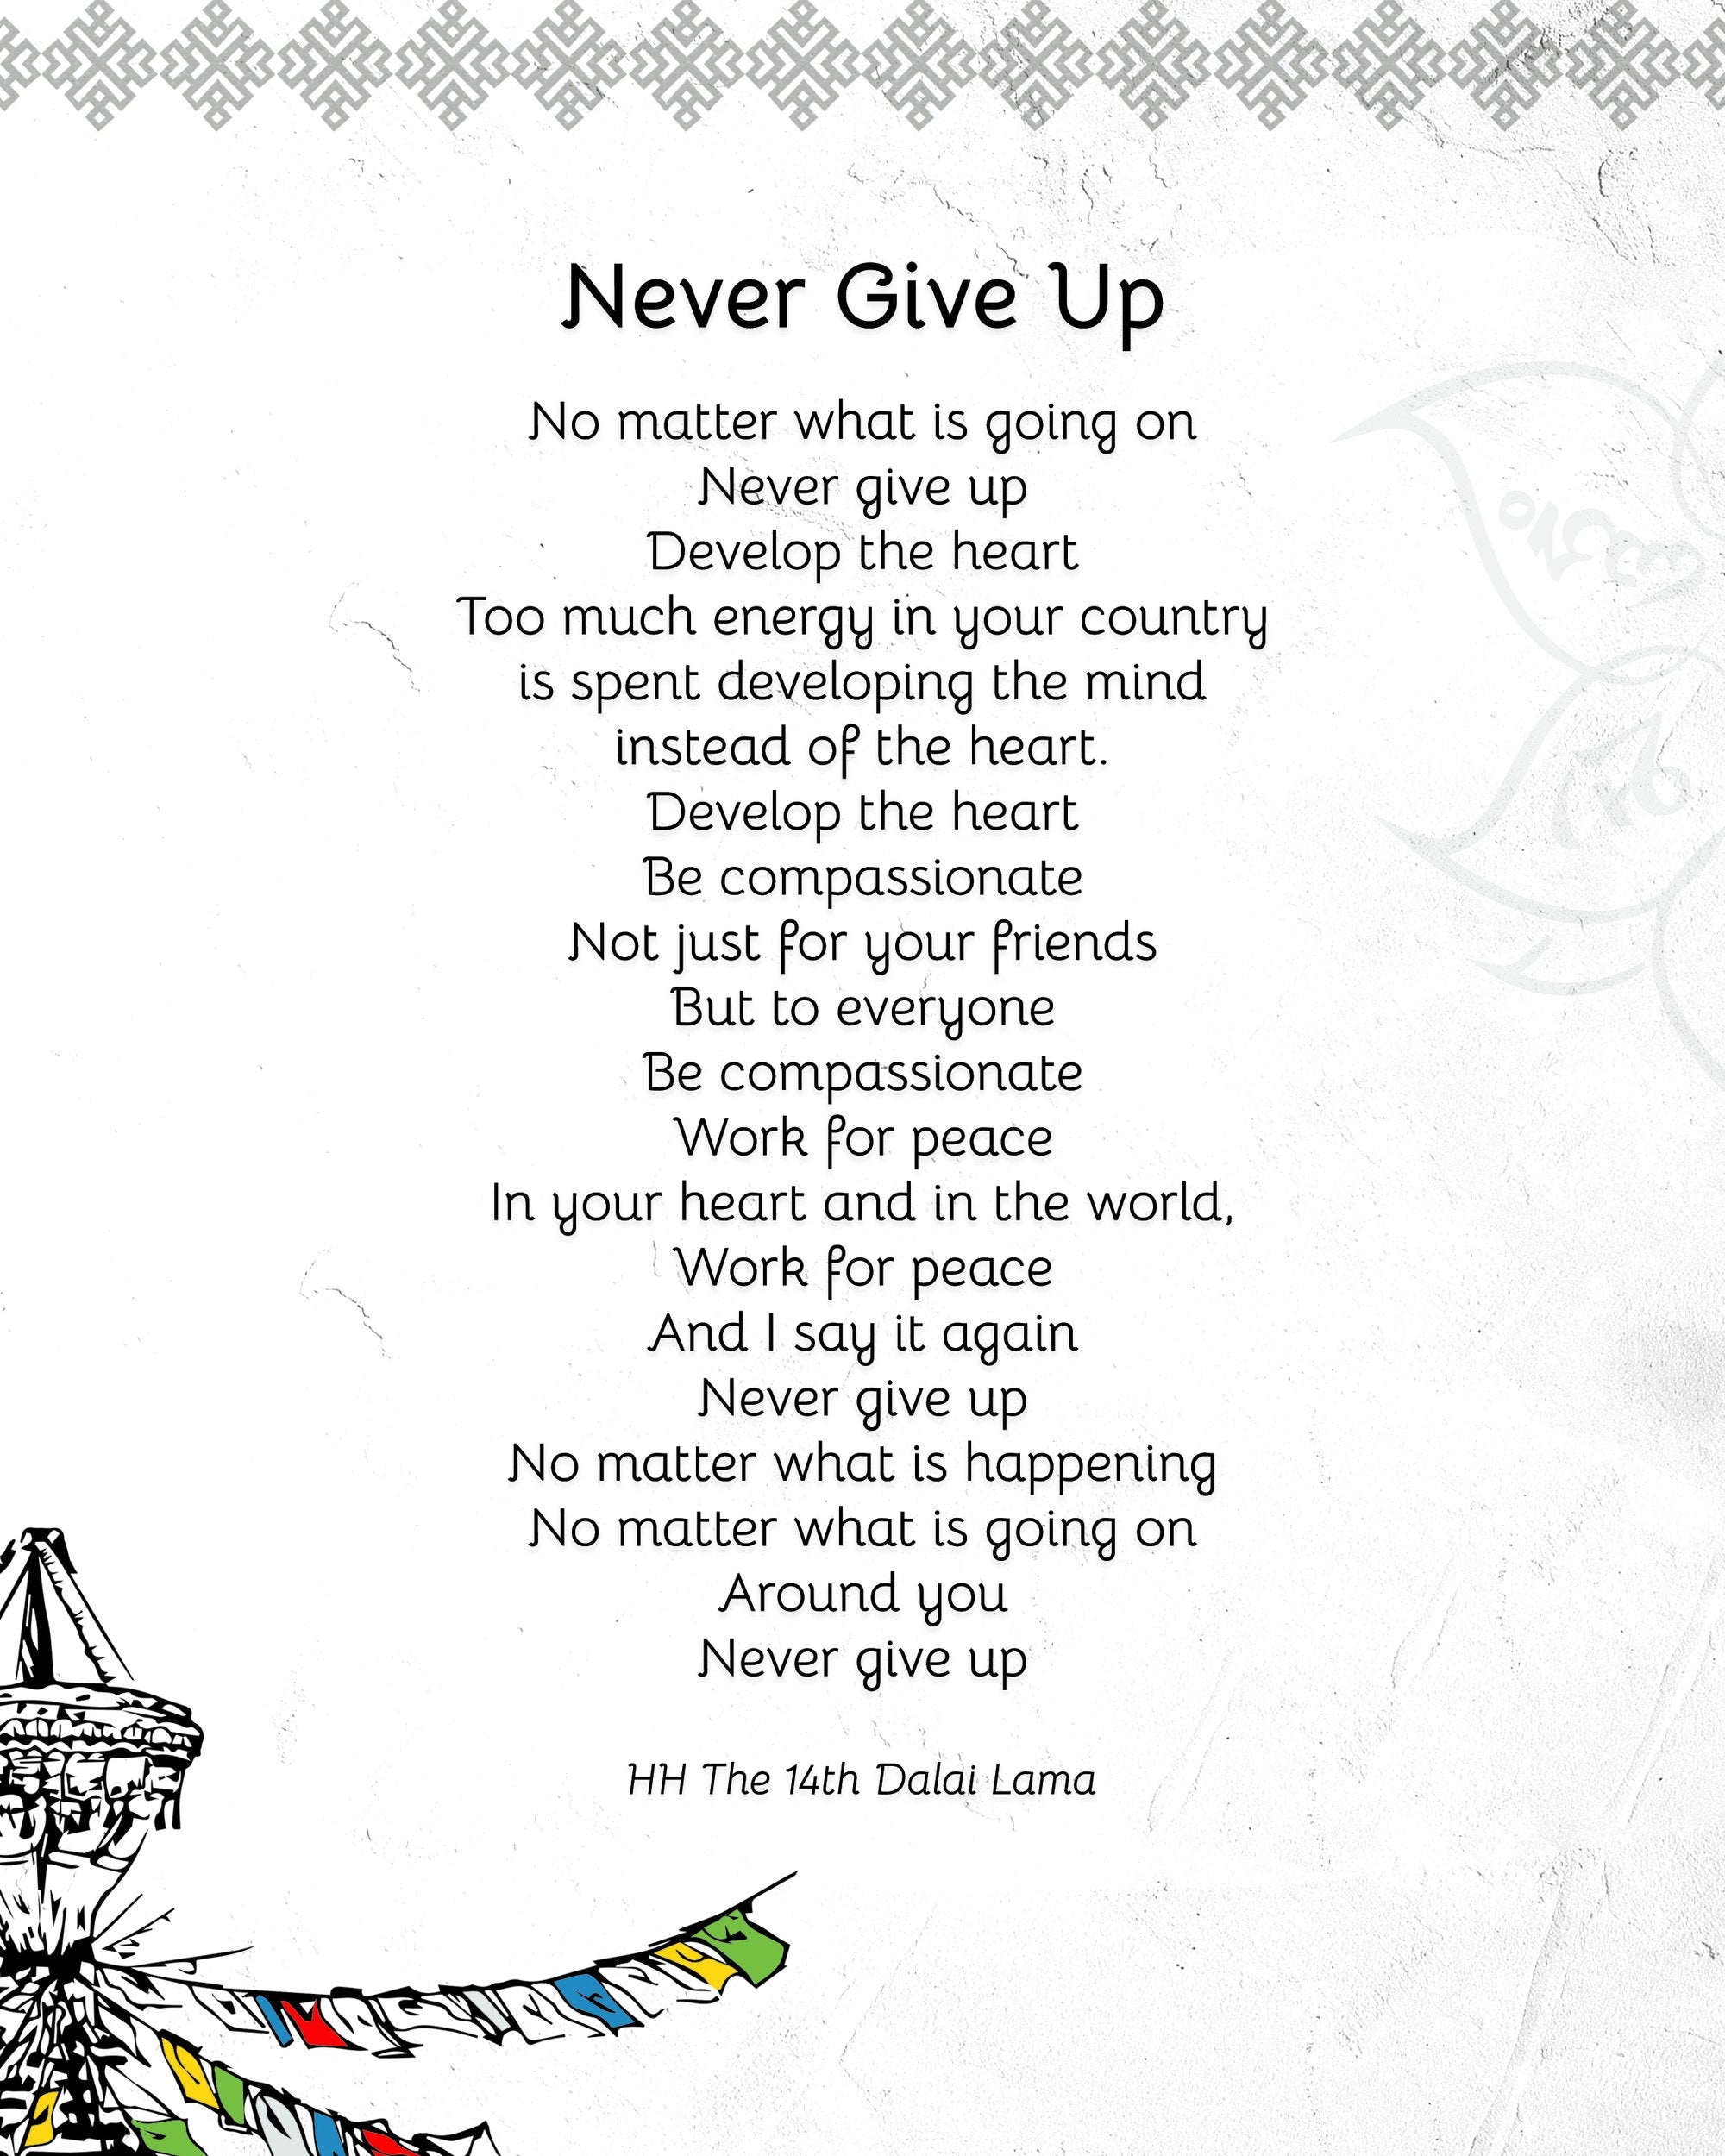 Quotes Prints for Cards, Wall art, Posters. Wisdom quotes by HH the Dalai Lama &quot;Never Give Up&quot; for instant download